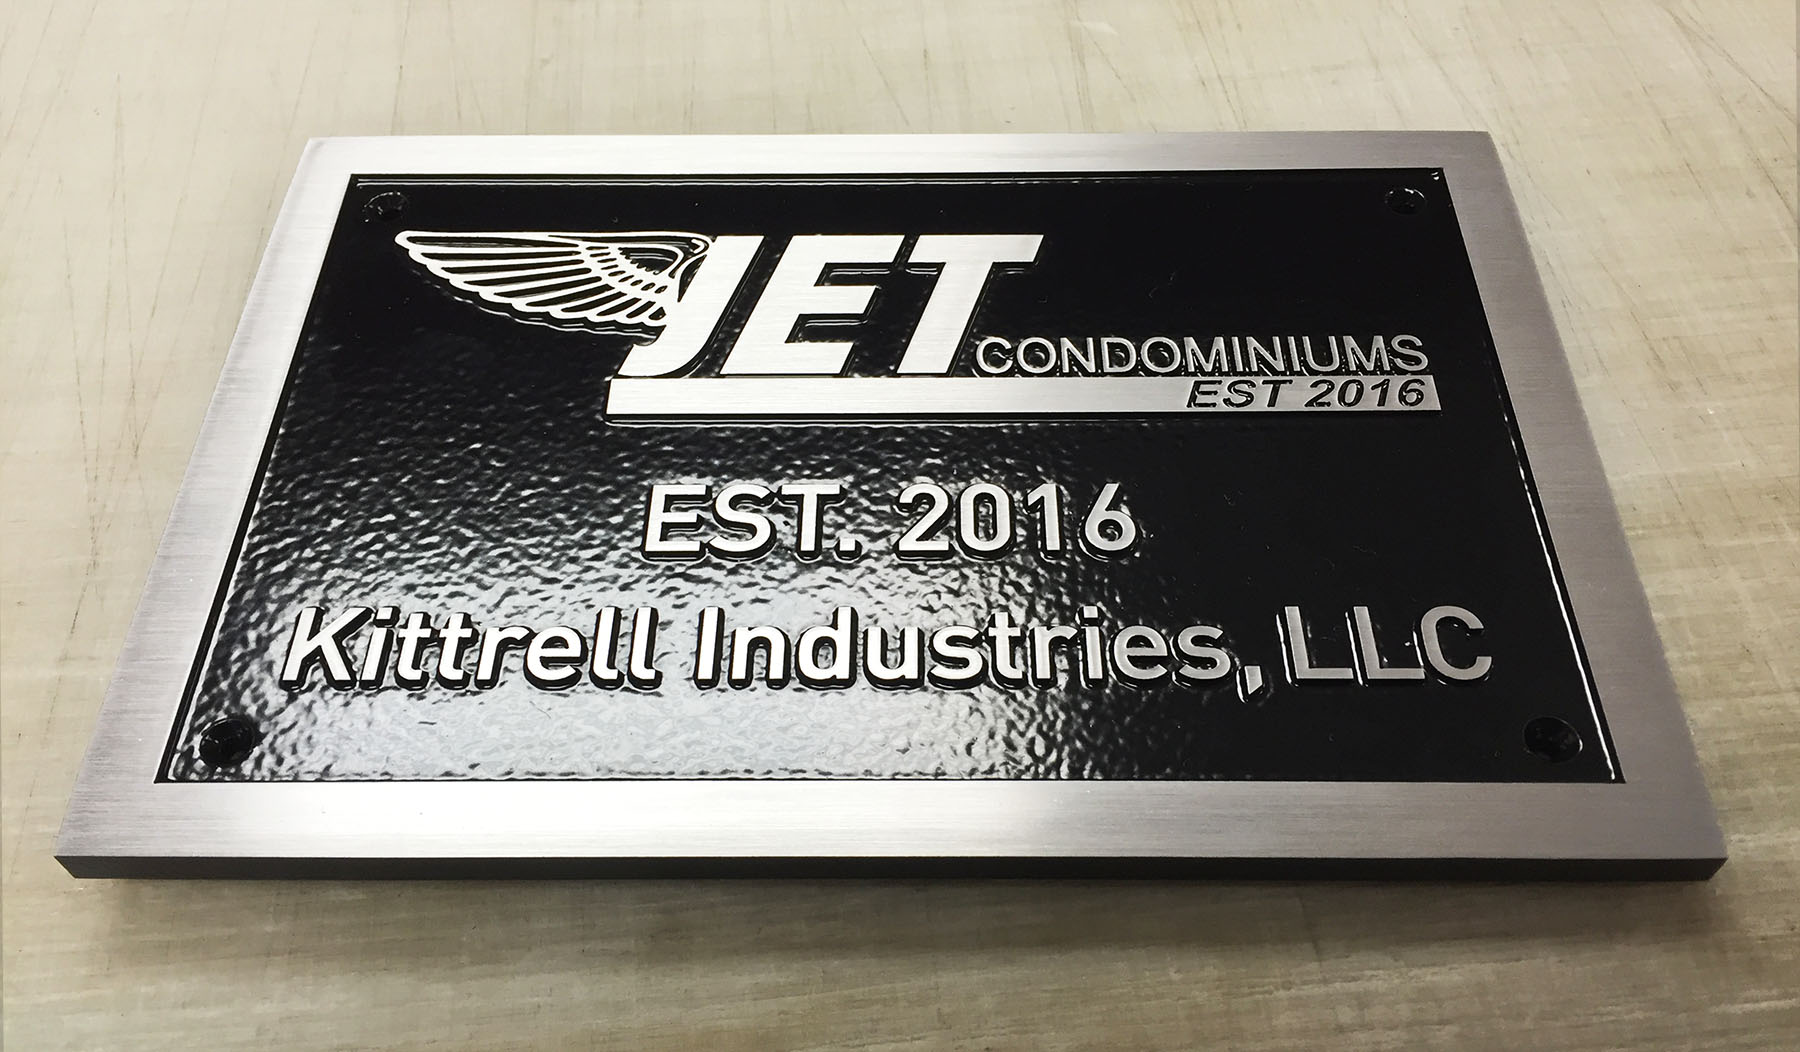 Plaque: 1/4" thick solid brushed aluminum. Painted black, leatherette texture